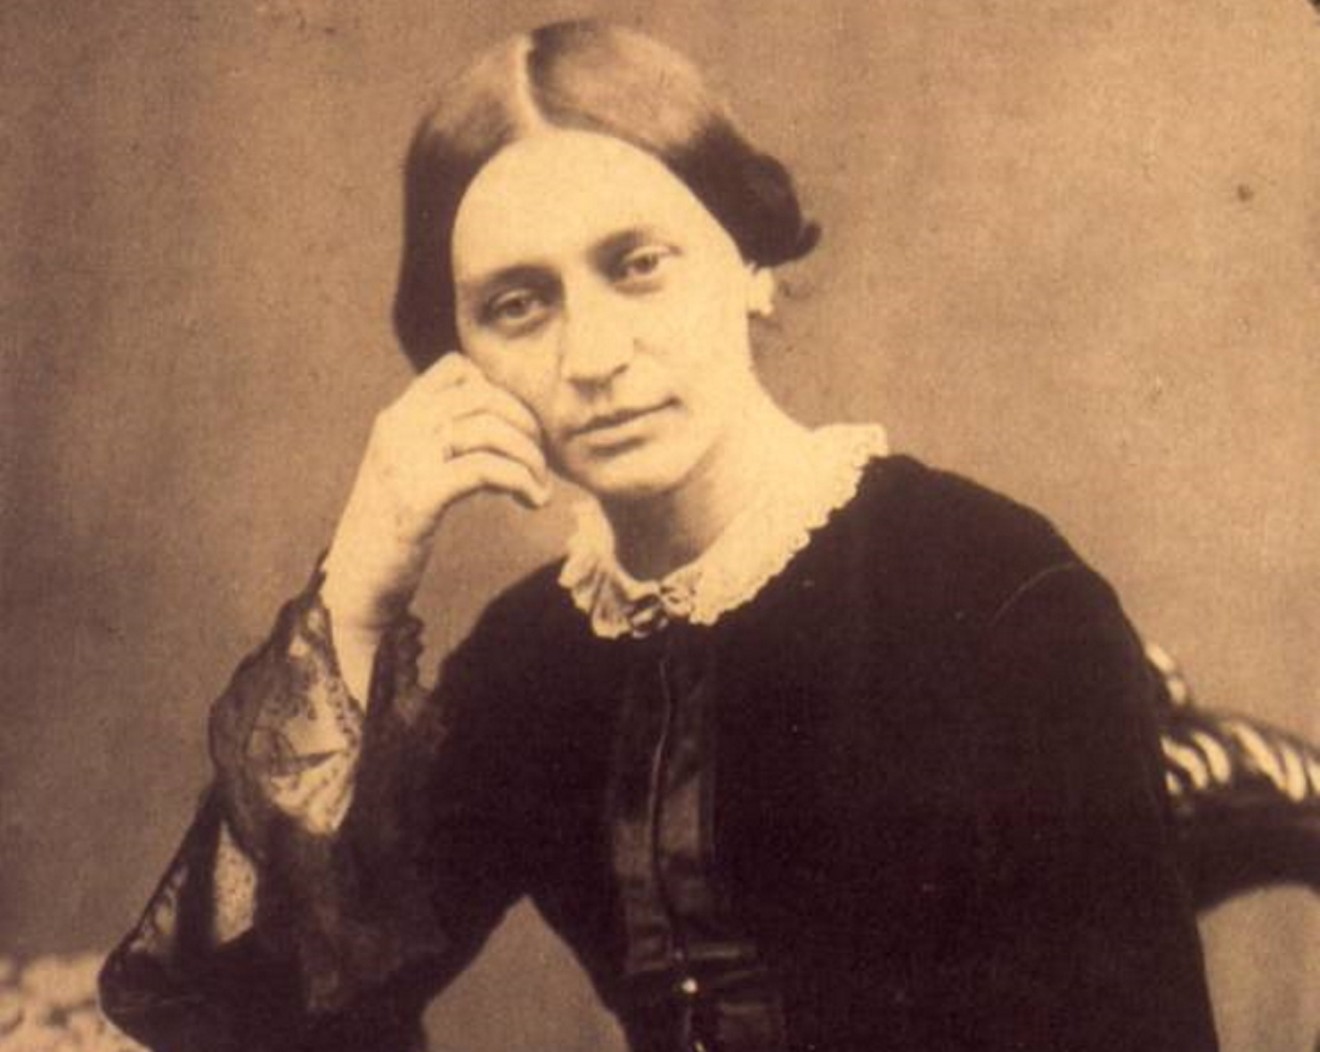 Clara Schumann, wife of Romantic composer Robert Schumann, was a renowned pianist and composer who toured widely and gave birth to eight children. So, what have you been doing, Mr. Man?